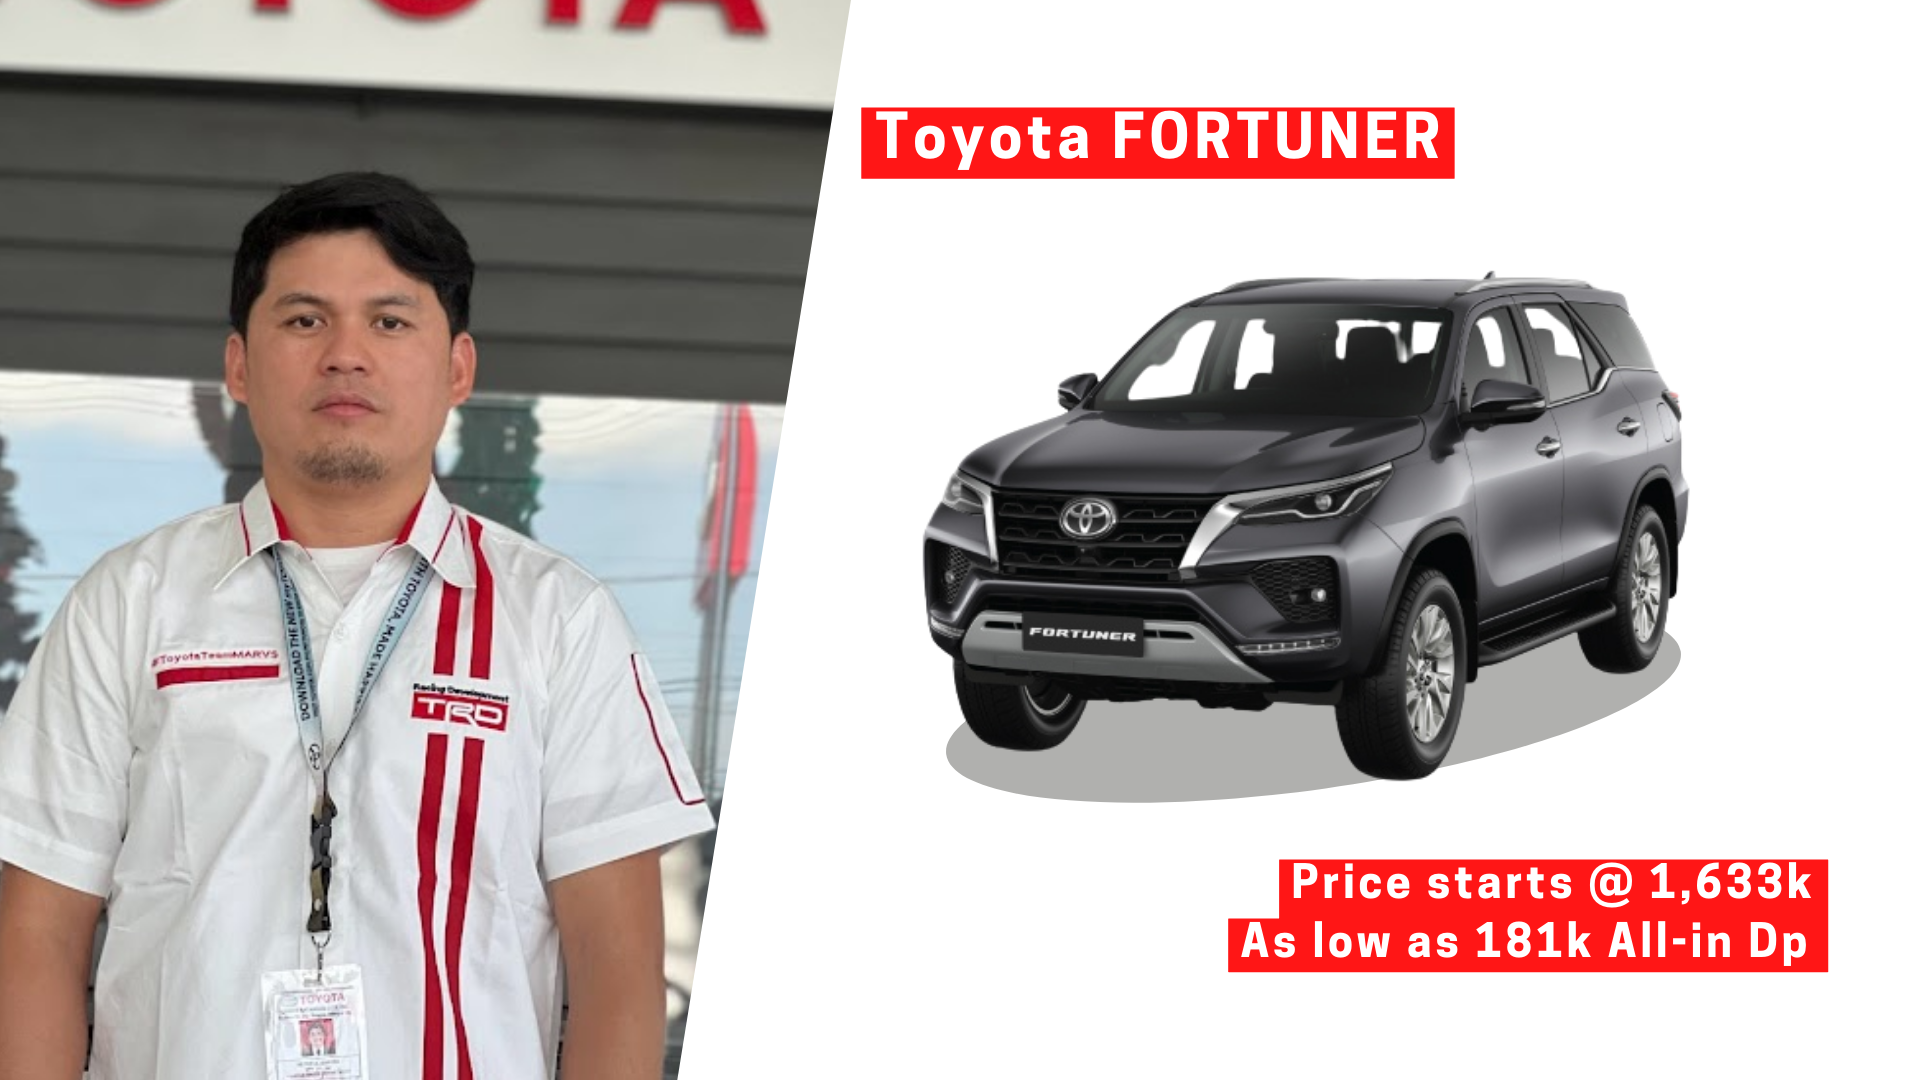 Toyota FORTUNER Promos by Peter Garcia